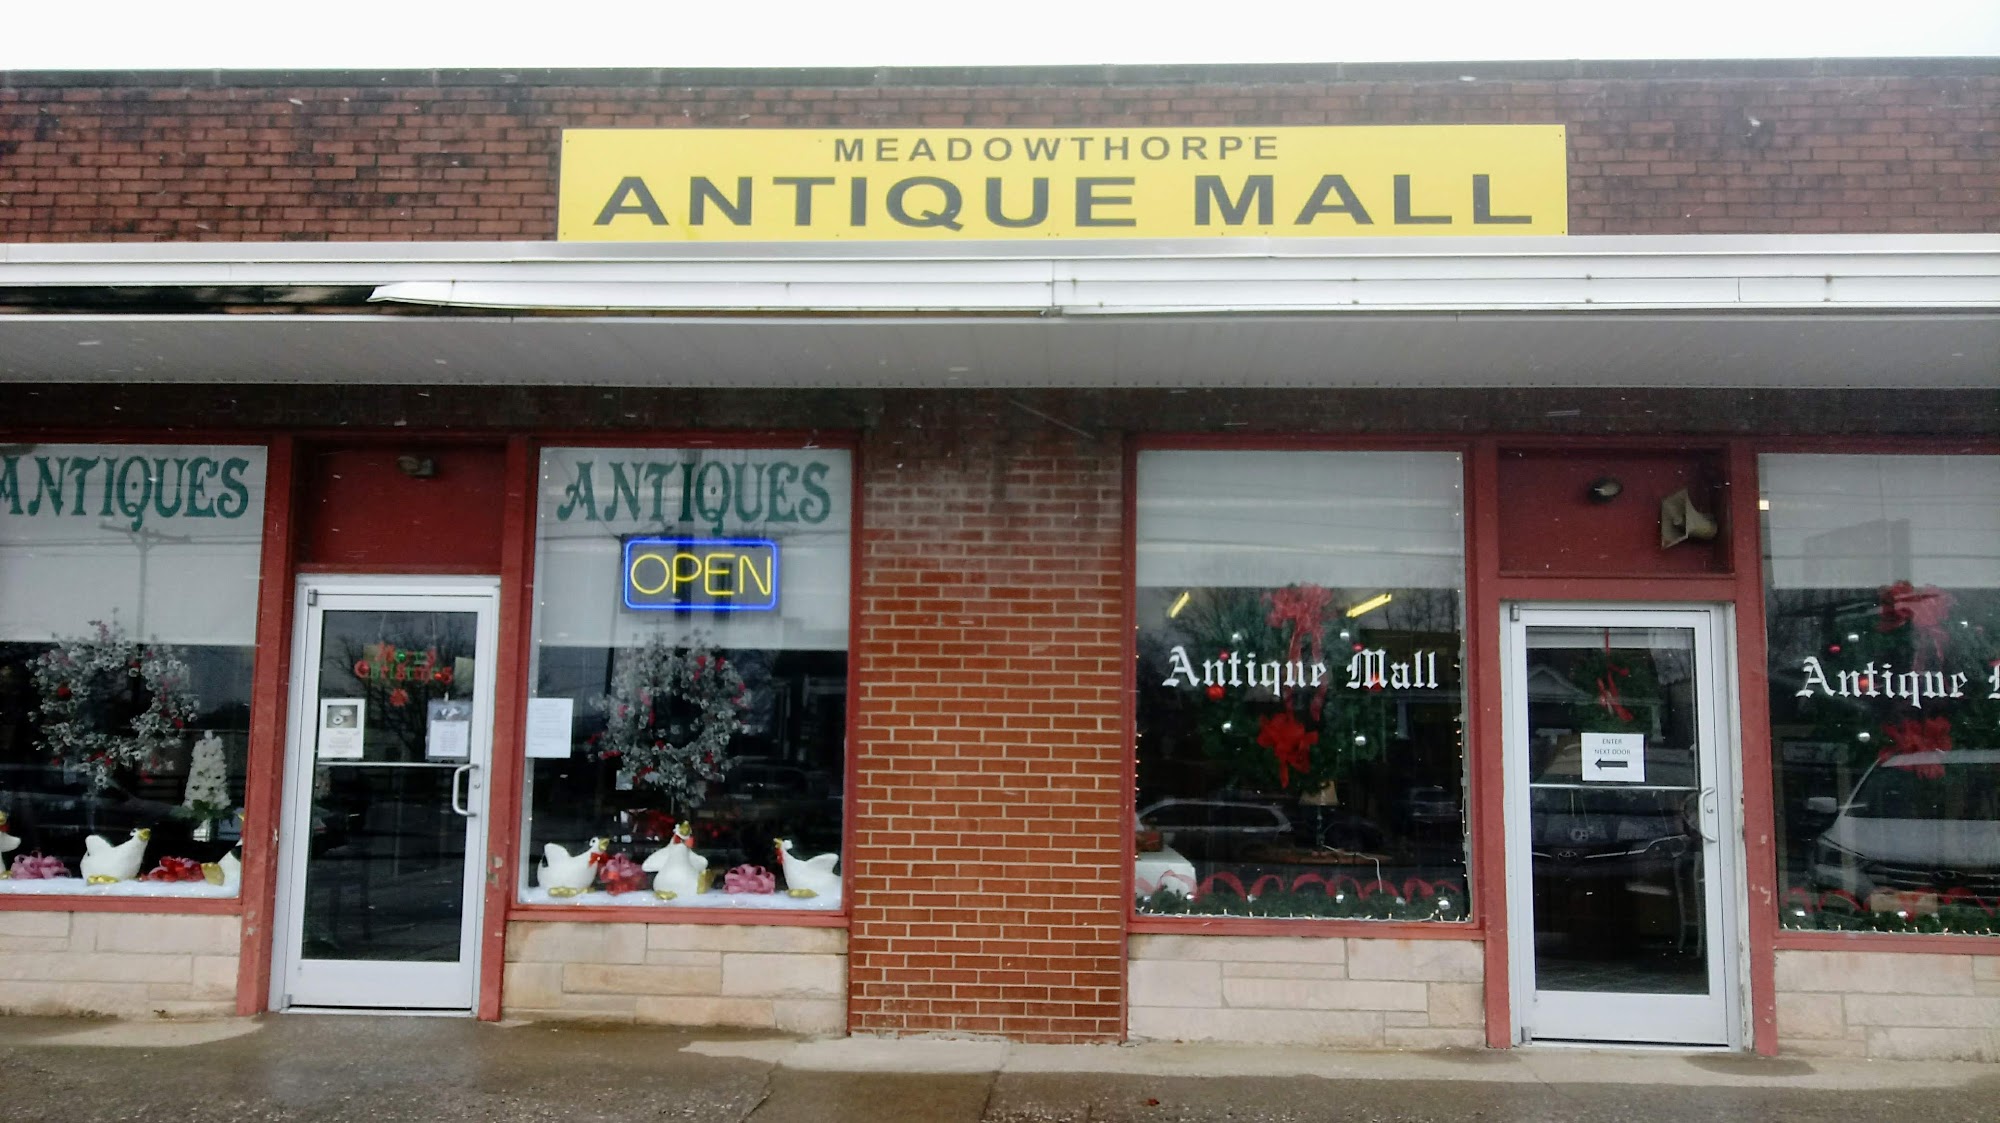 Meadowthorpe Antique Mall